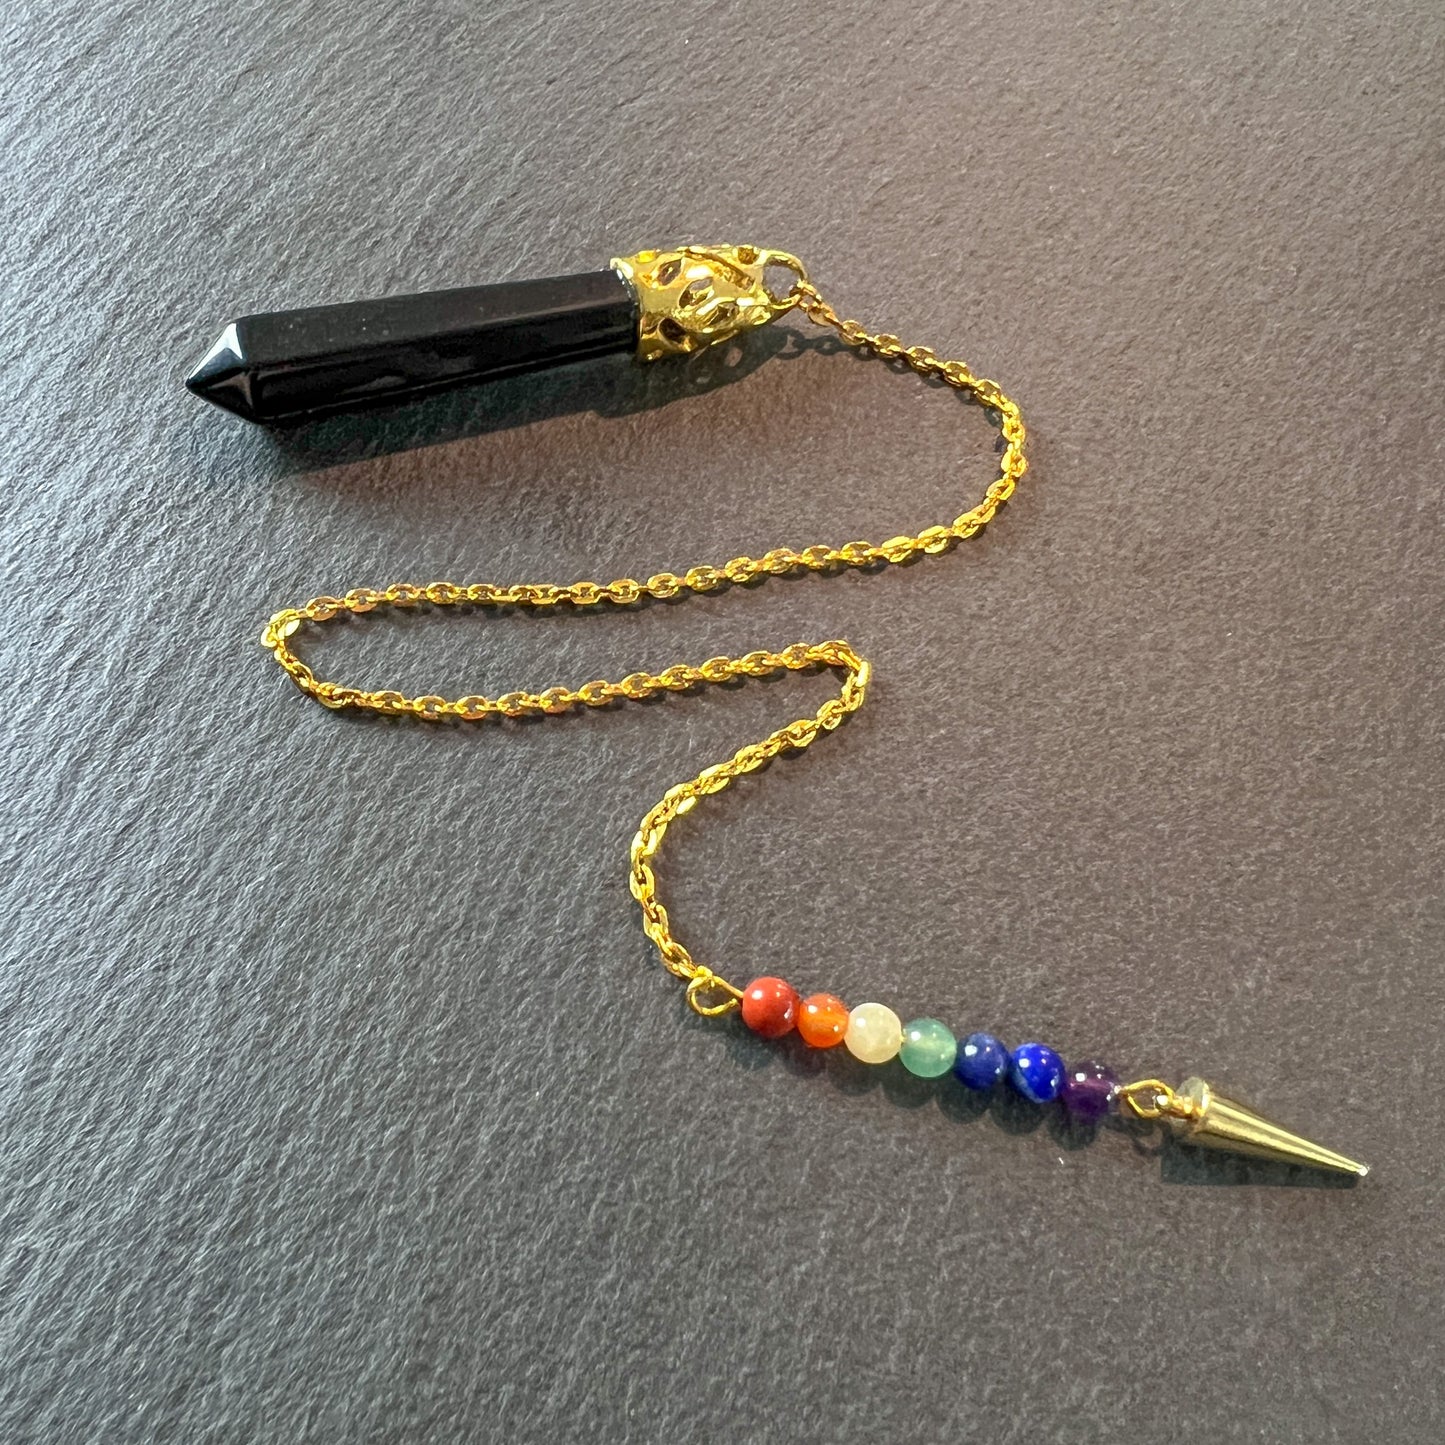 Golden onyx and seven chakras stones pendulum with a spike Baguette Magick